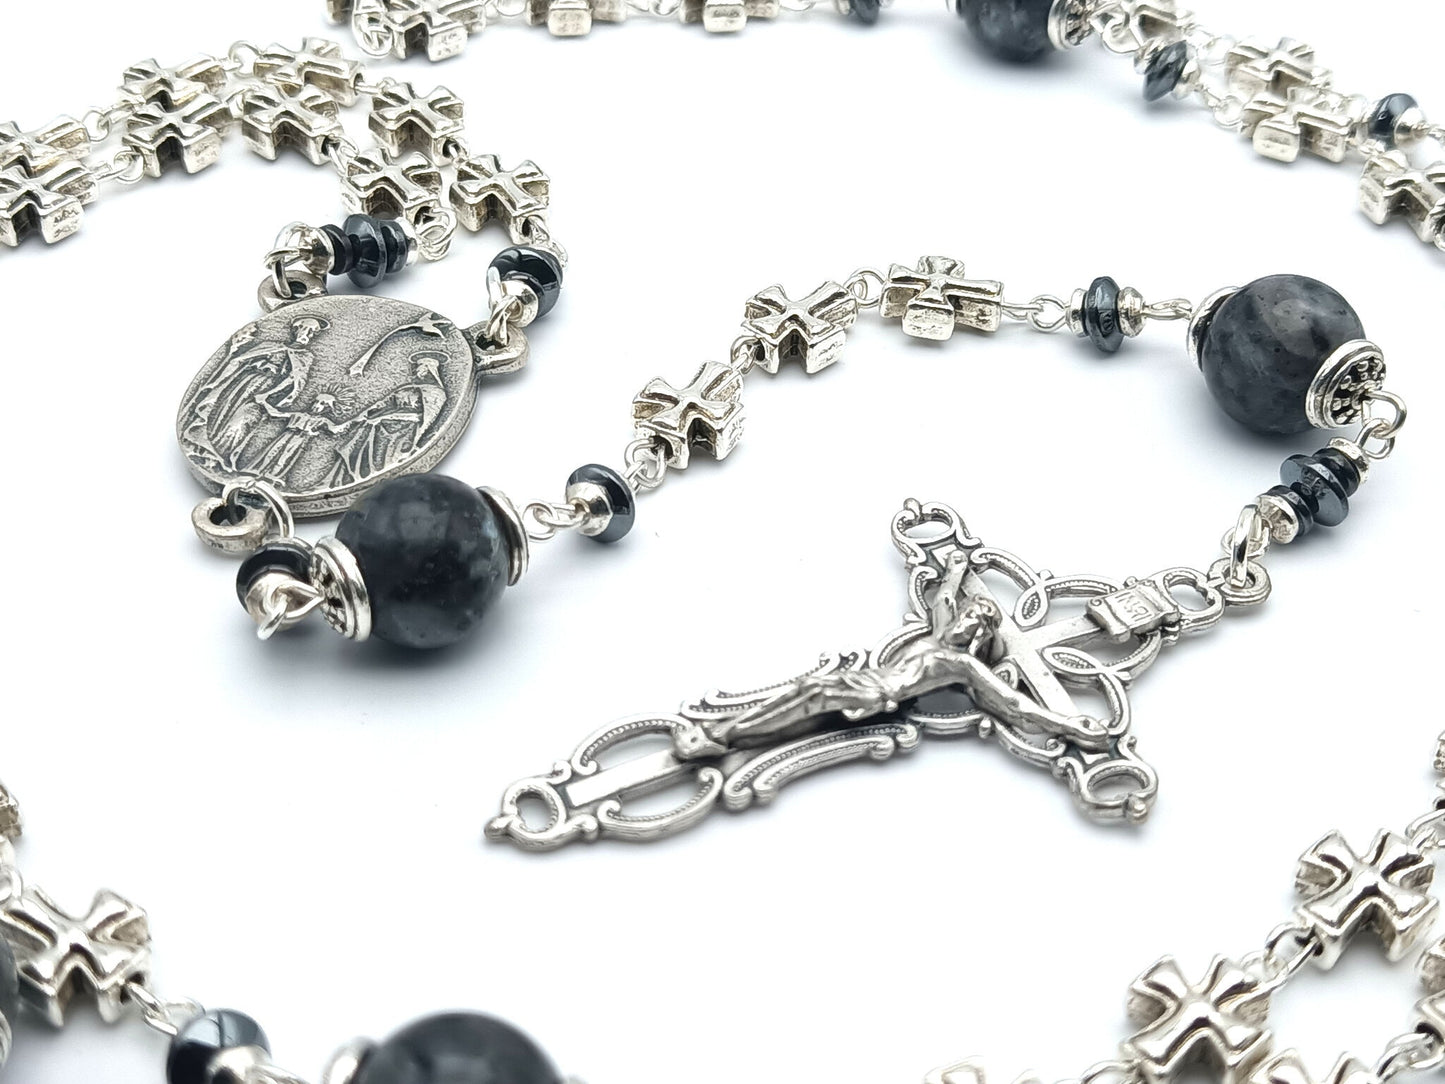 Three hearts of Jesus, Mary and Joseph unique rosary beads with metal cross beads, dark grey gemstone pater beads, silver bead caps, crucifix and centre medal.